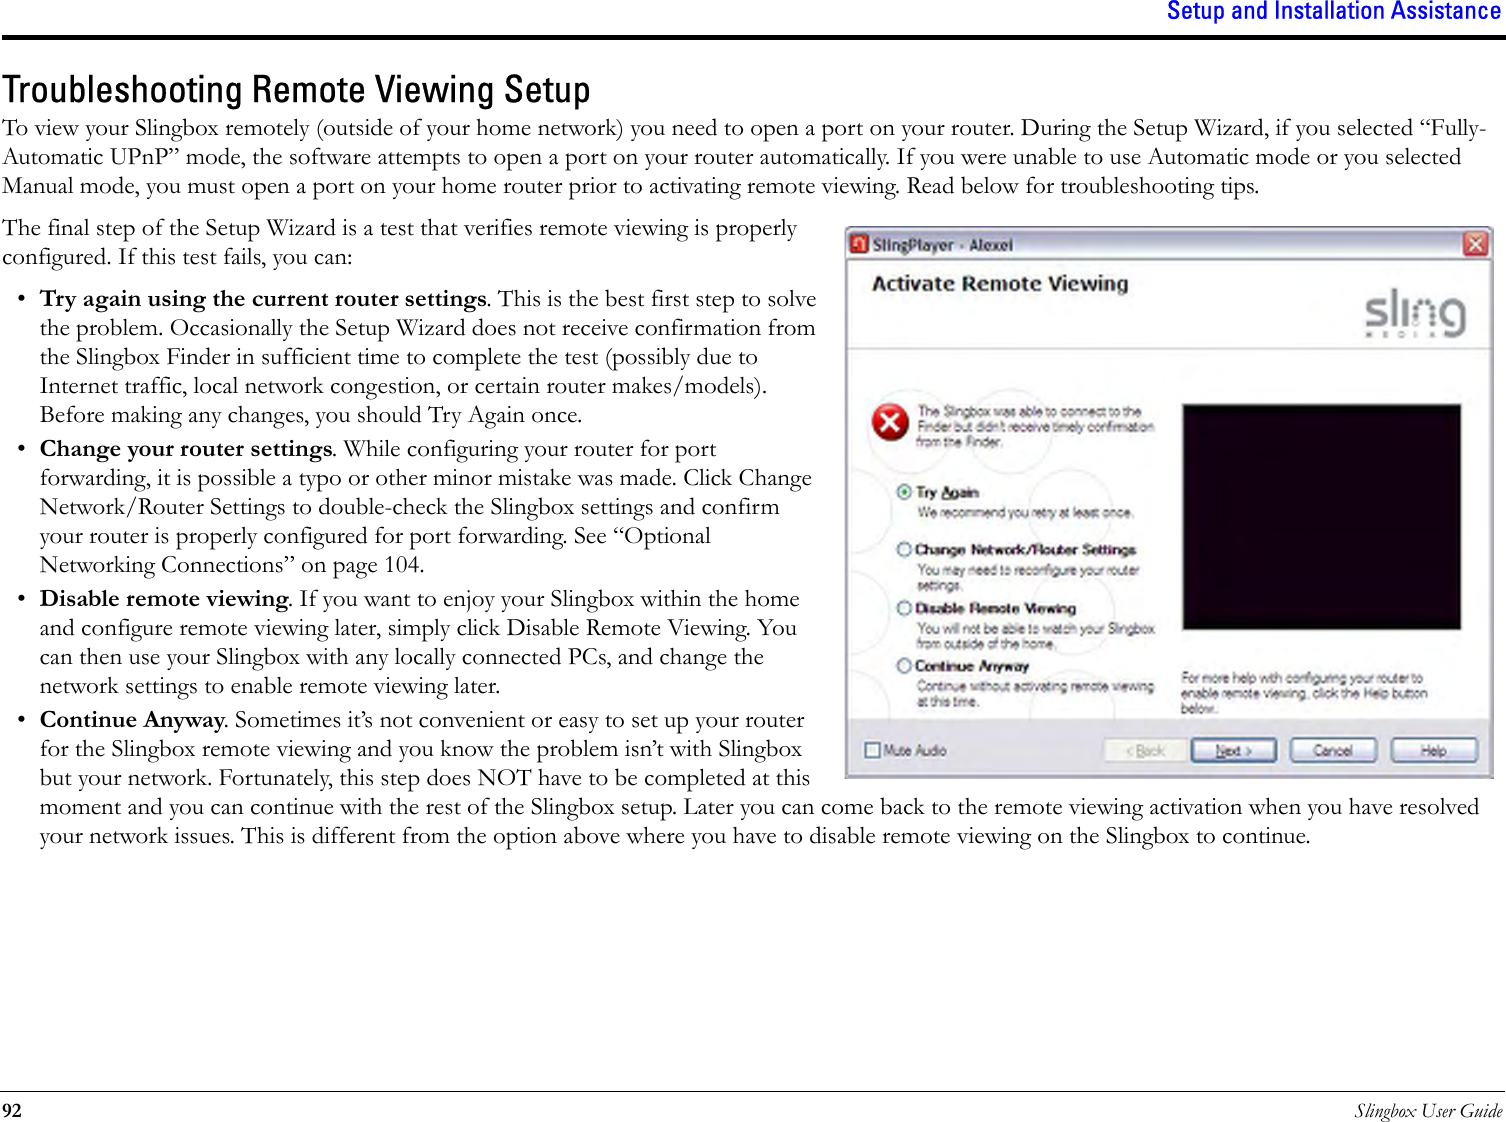 Setup and Installation Assistance92 Slingbox User GuideTroubleshooting Remote Viewing SetupTo view your Slingbox remotely (outside of your home network) you need to open a port on your router. During the Setup Wizard, if you selected “Fully-Automatic UPnP” mode, the software attempts to open a port on your router automatically. If you were unable to use Automatic mode or you selected Manual mode, you must open a port on your home router prior to activating remote viewing. Read below for troubleshooting tips.The final step of the Setup Wizard is a test that verifies remote viewing is properly configured. If this test fails, you can:•Try again using the current router settings. This is the best first step to solve the problem. Occasionally the Setup Wizard does not receive confirmation from the Slingbox Finder in sufficient time to complete the test (possibly due to Internet traffic, local network congestion, or certain router makes/models). Before making any changes, you should Try Again once.•Change your router settings. While configuring your router for port forwarding, it is possible a typo or other minor mistake was made. Click Change Network/Router Settings to double-check the Slingbox settings and confirm your router is properly configured for port forwarding. See “Optional Networking Connections” on page 104.•Disable remote viewing. If you want to enjoy your Slingbox within the home and configure remote viewing later, simply click Disable Remote Viewing. You can then use your Slingbox with any locally connected PCs, and change the network settings to enable remote viewing later.•Continue Anyway. Sometimes it’s not convenient or easy to set up your router for the Slingbox remote viewing and you know the problem isn’t with Slingbox but your network. Fortunately, this step does NOT have to be completed at this moment and you can continue with the rest of the Slingbox setup. Later you can come back to the remote viewing activation when you have resolved your network issues. This is different from the option above where you have to disable remote viewing on the Slingbox to continue.